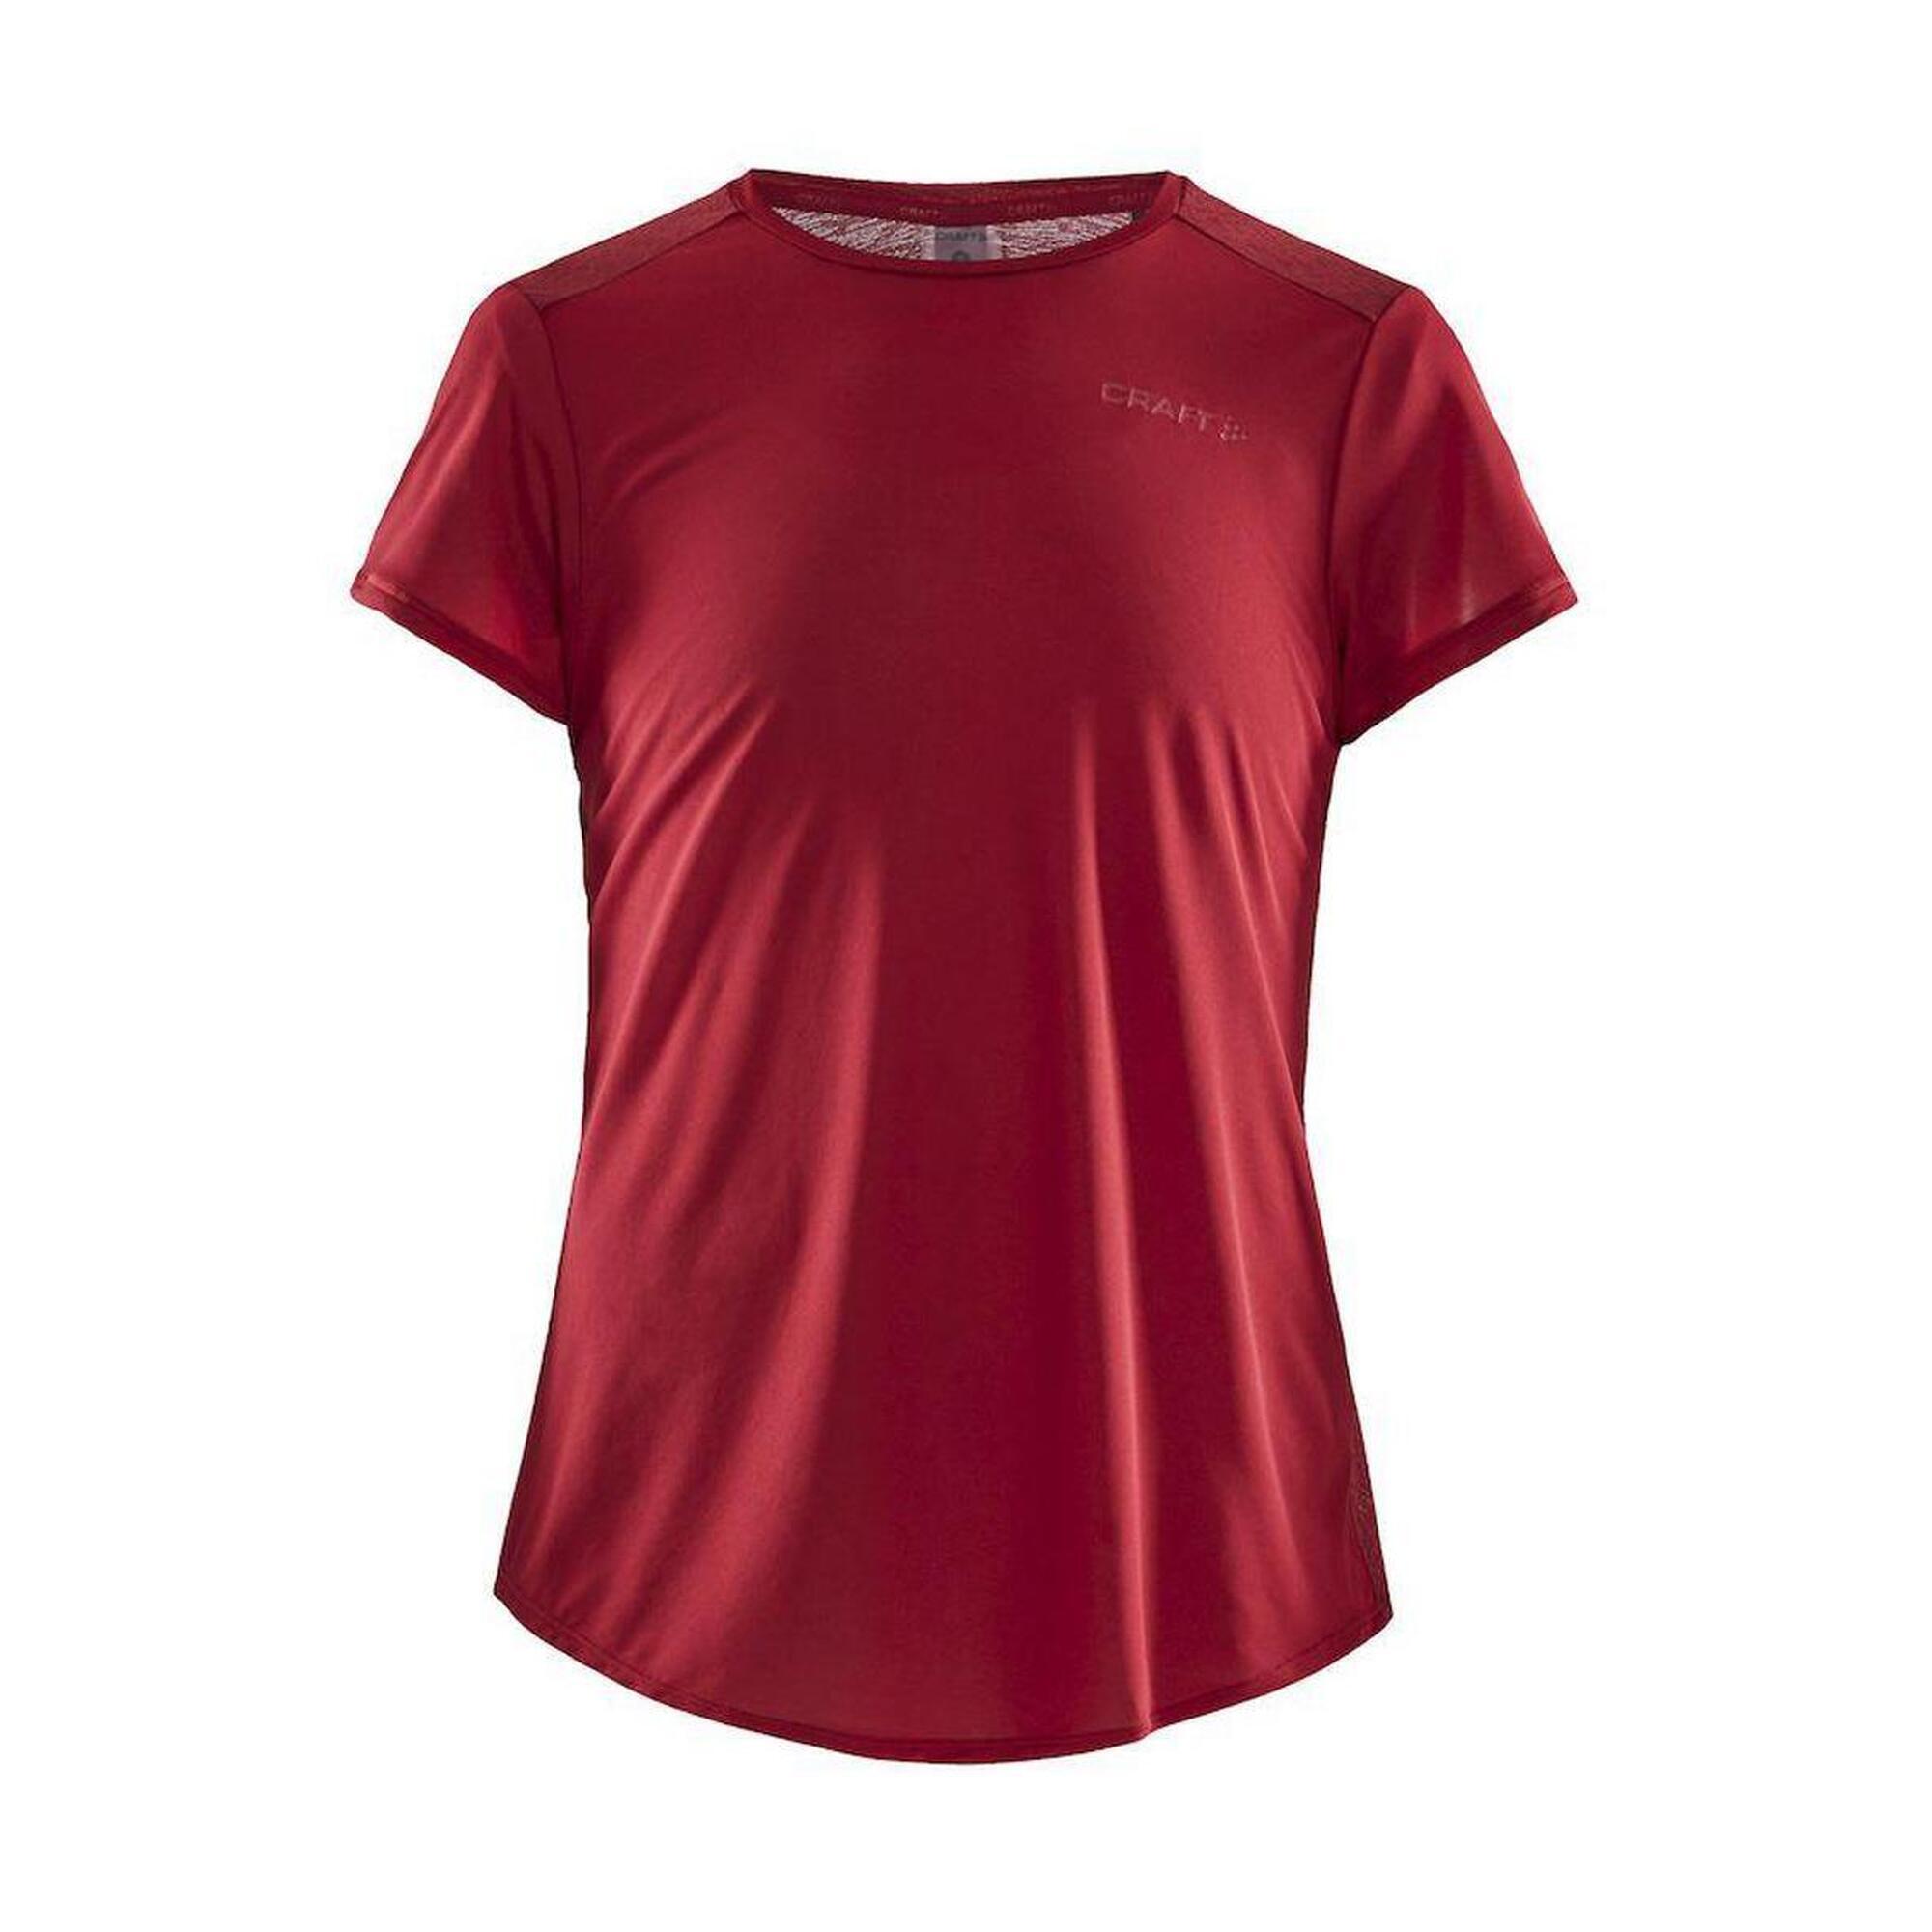 CRAFT Craft Women's Charge Short Sleeve T-Shirt - Red